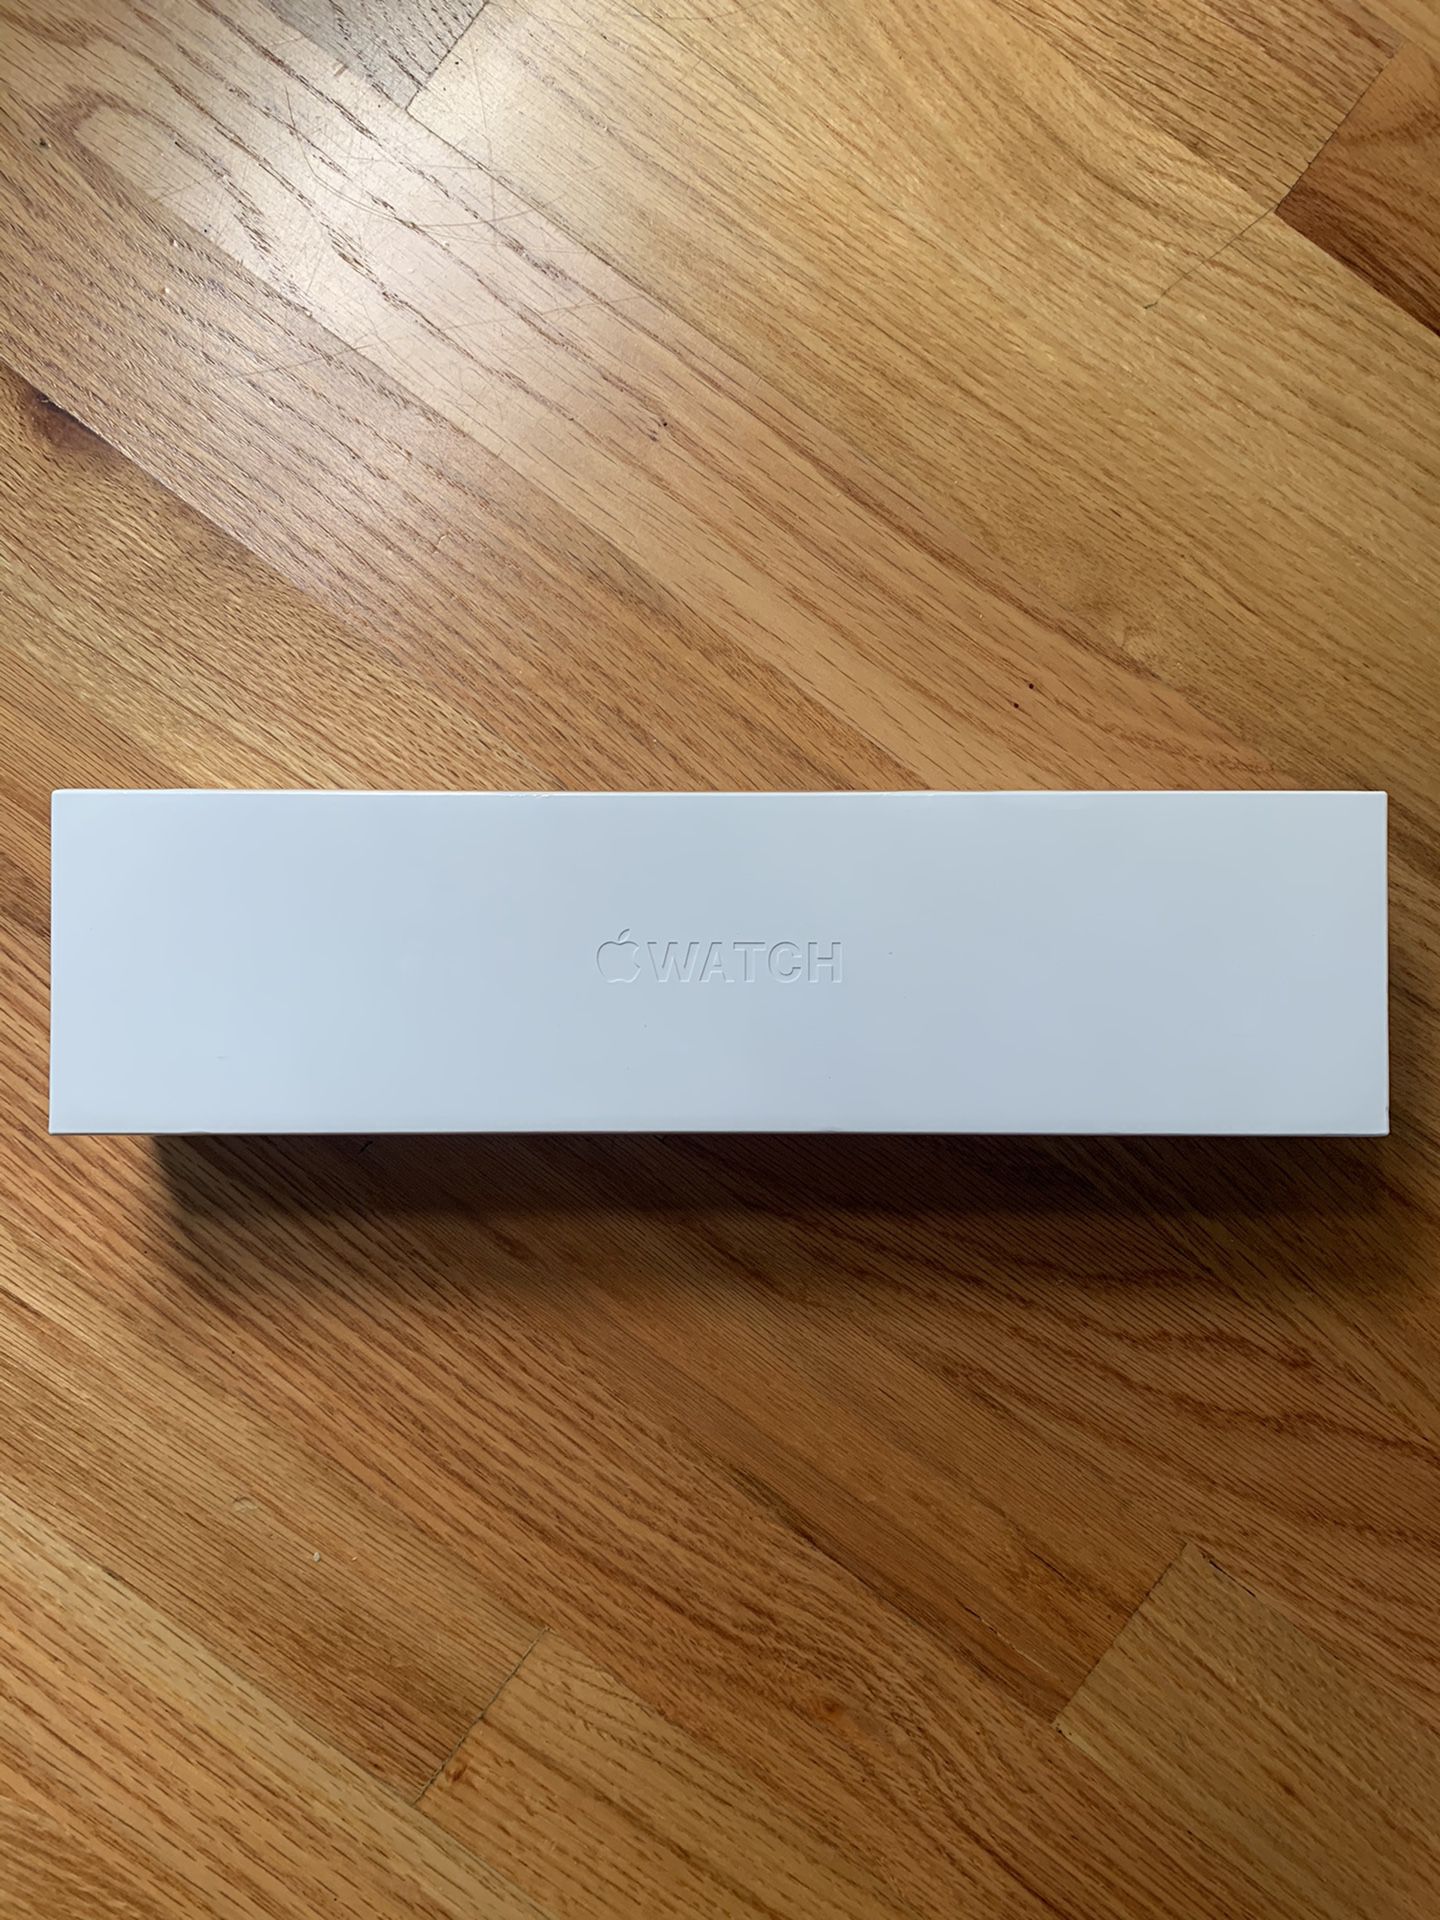 Apple Watch series 5 Space grey with black sport band. 44mm with cellular. New in box